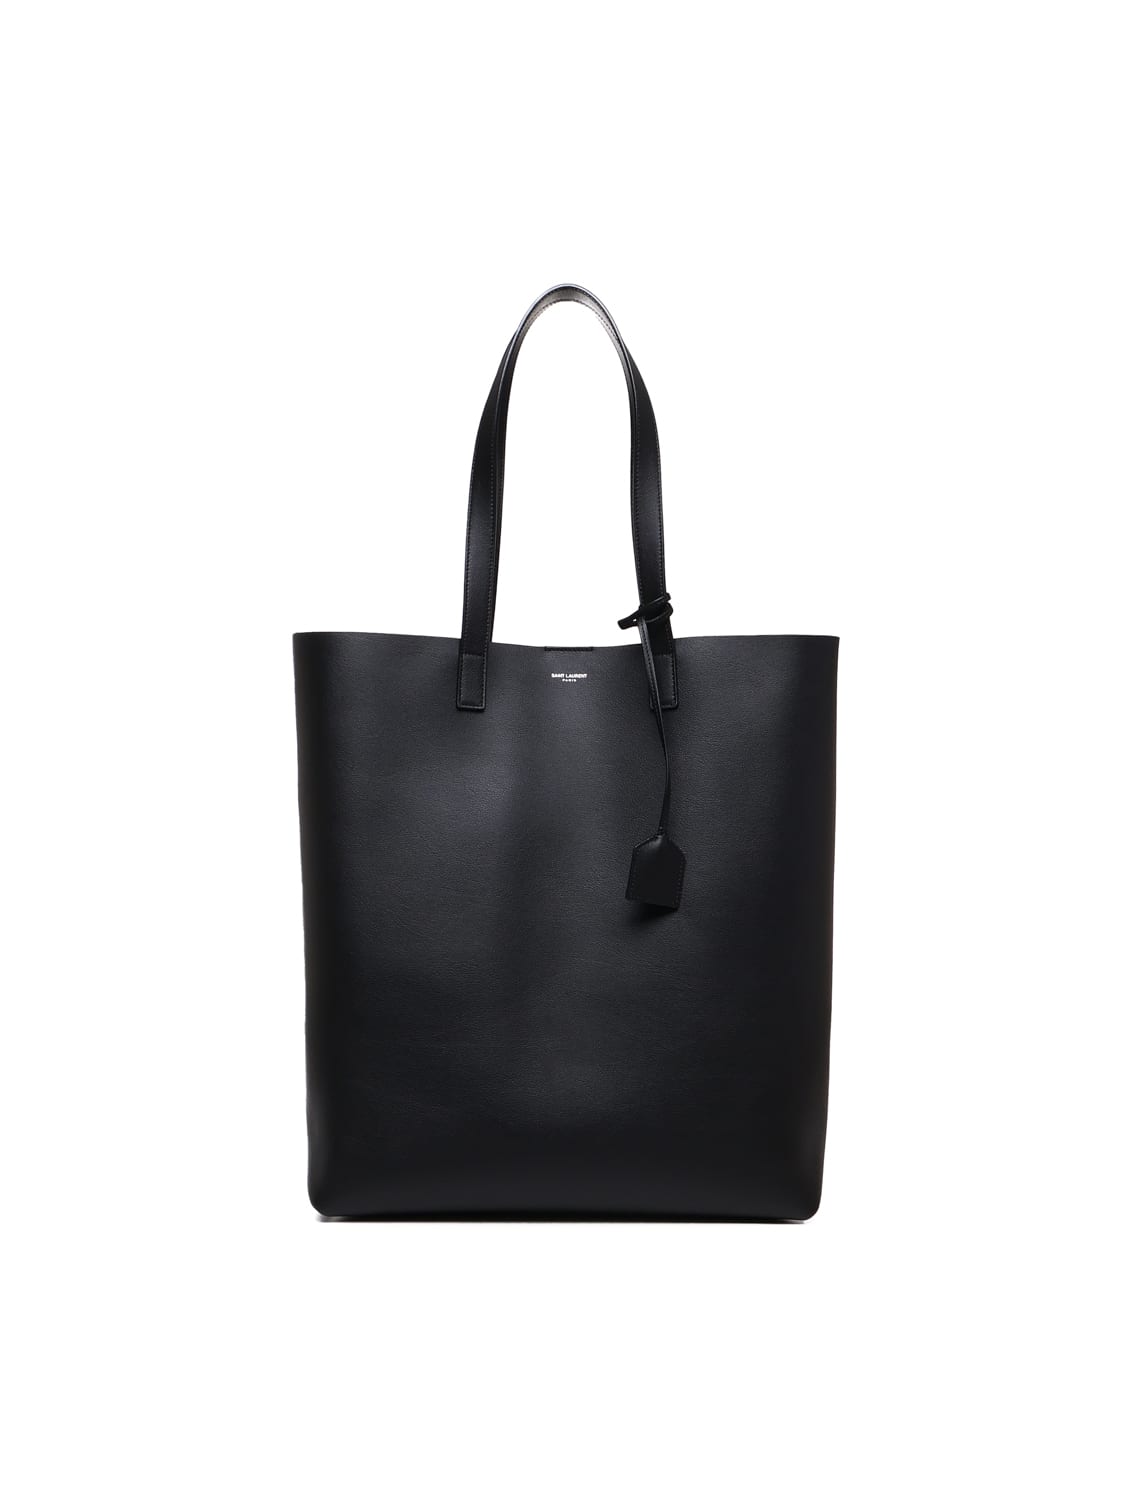 SAINT LAURENT BOLD SHOPPING BAG IN SOFT LEATHER